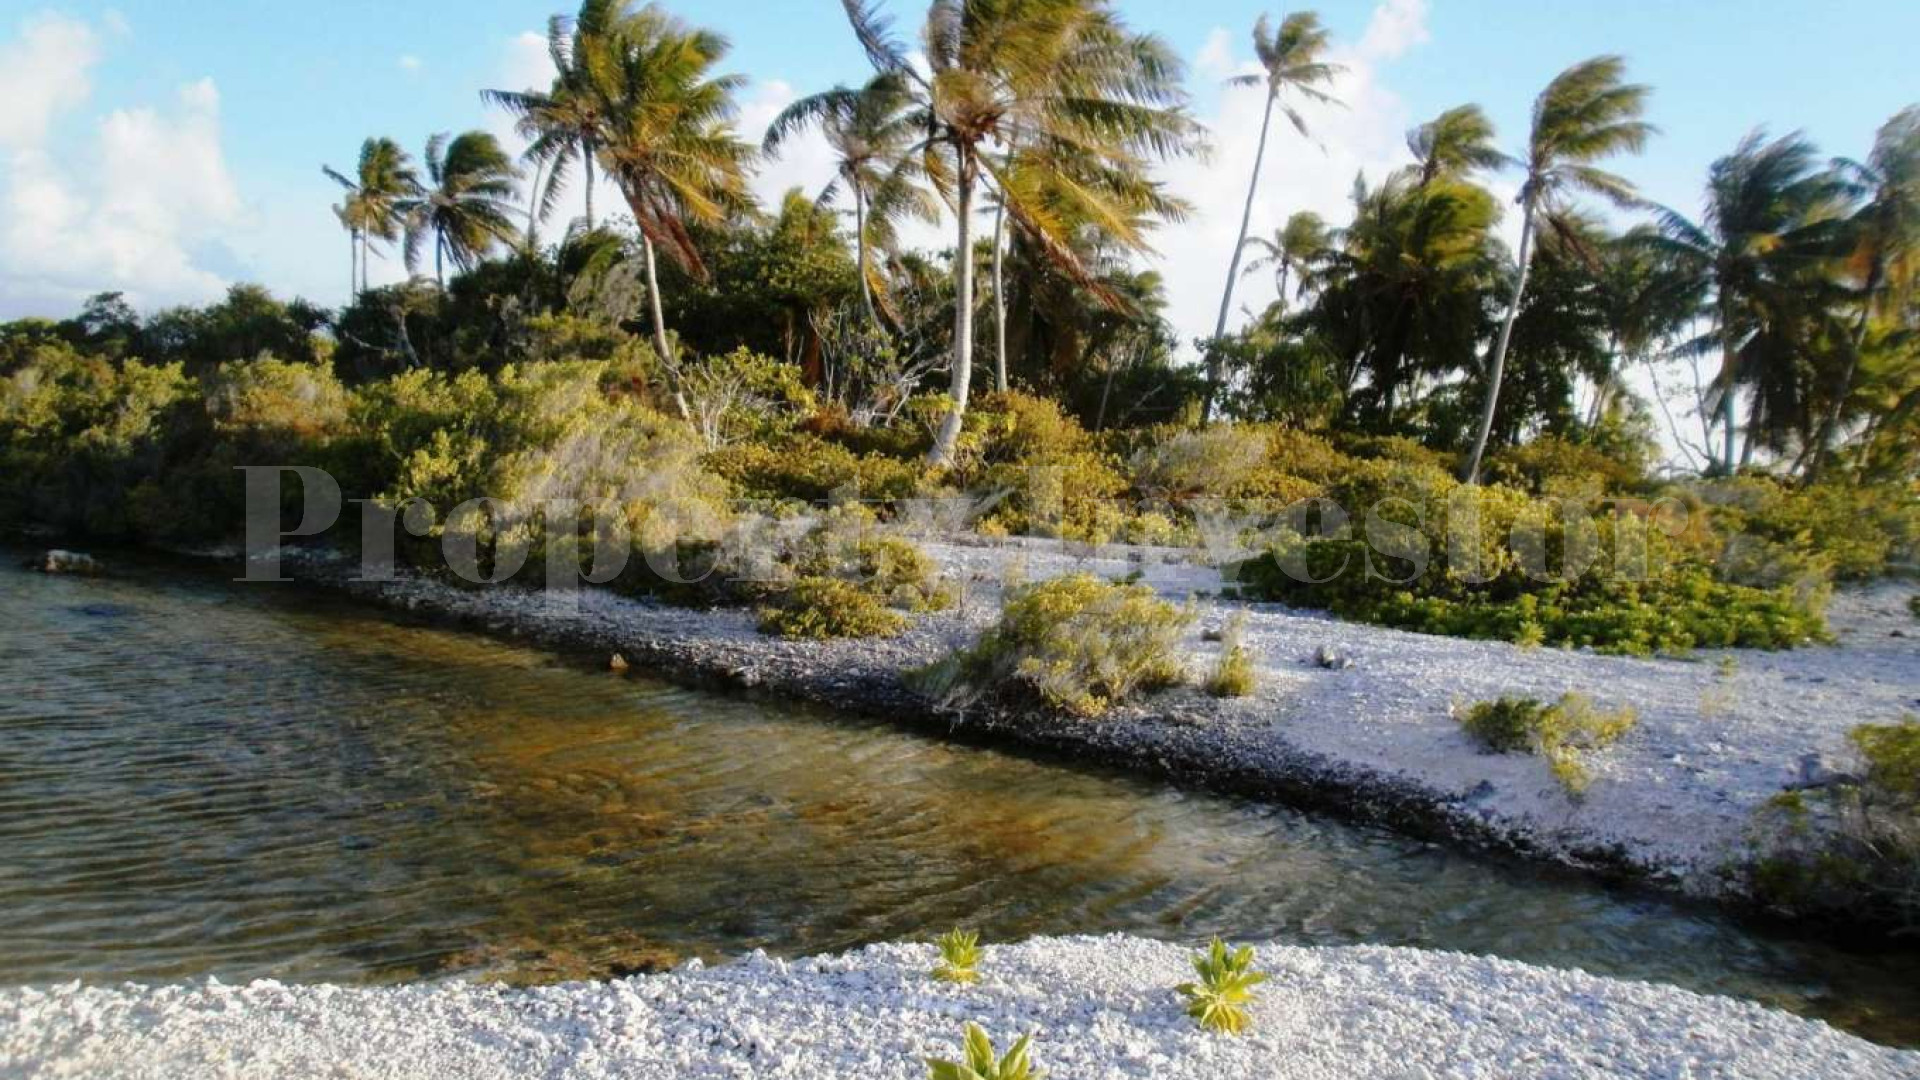 Stunning 1.4 Hectare Virgin Island for Sale in French Polynesia